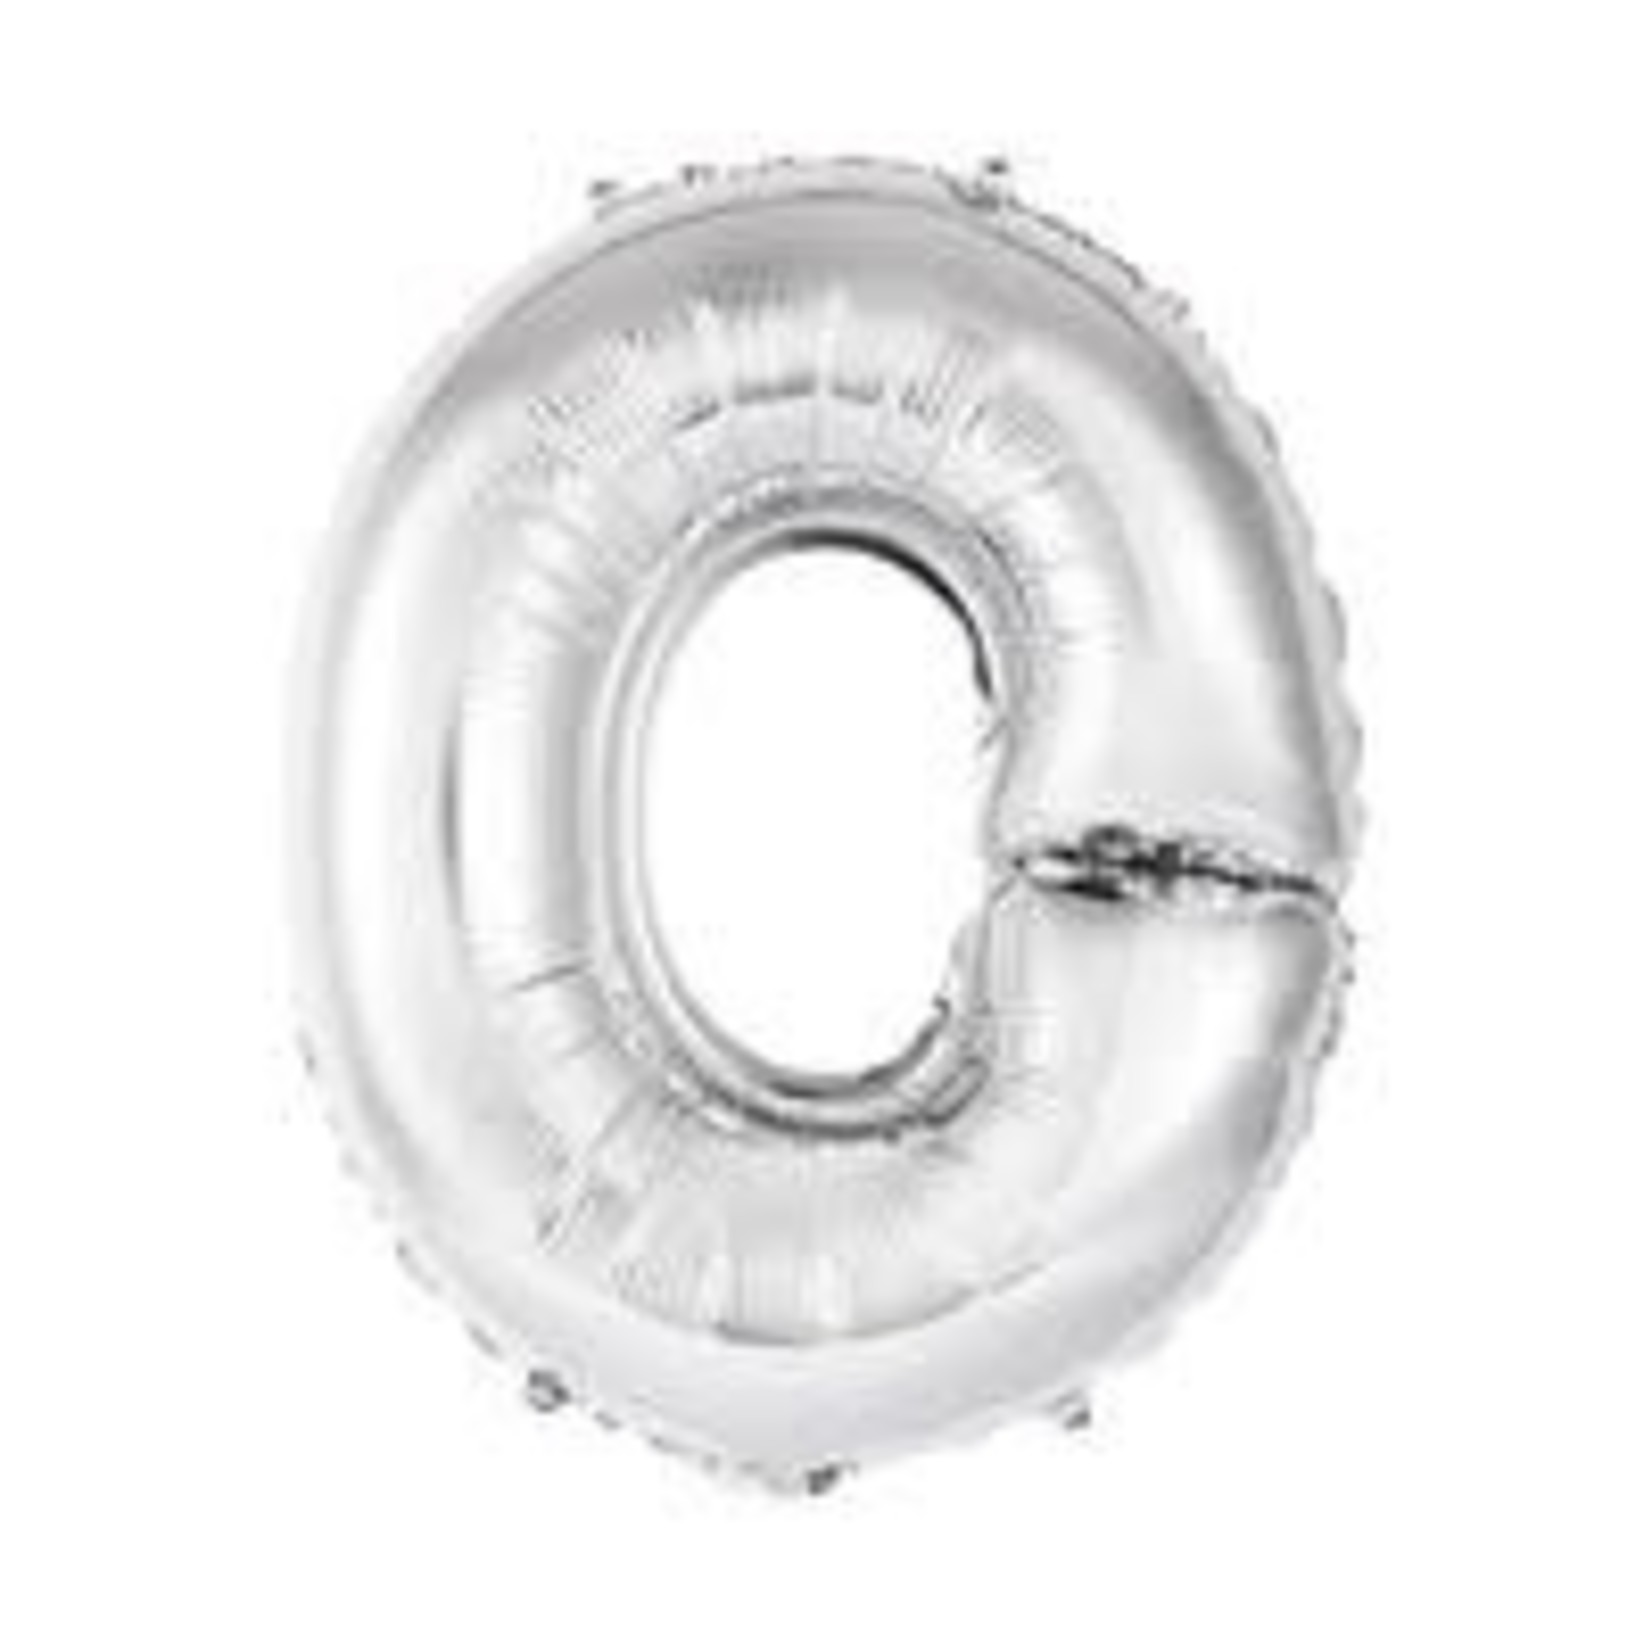 unique 14" Silver 'O' Air-Filled Mylar Balloon - 1ct.